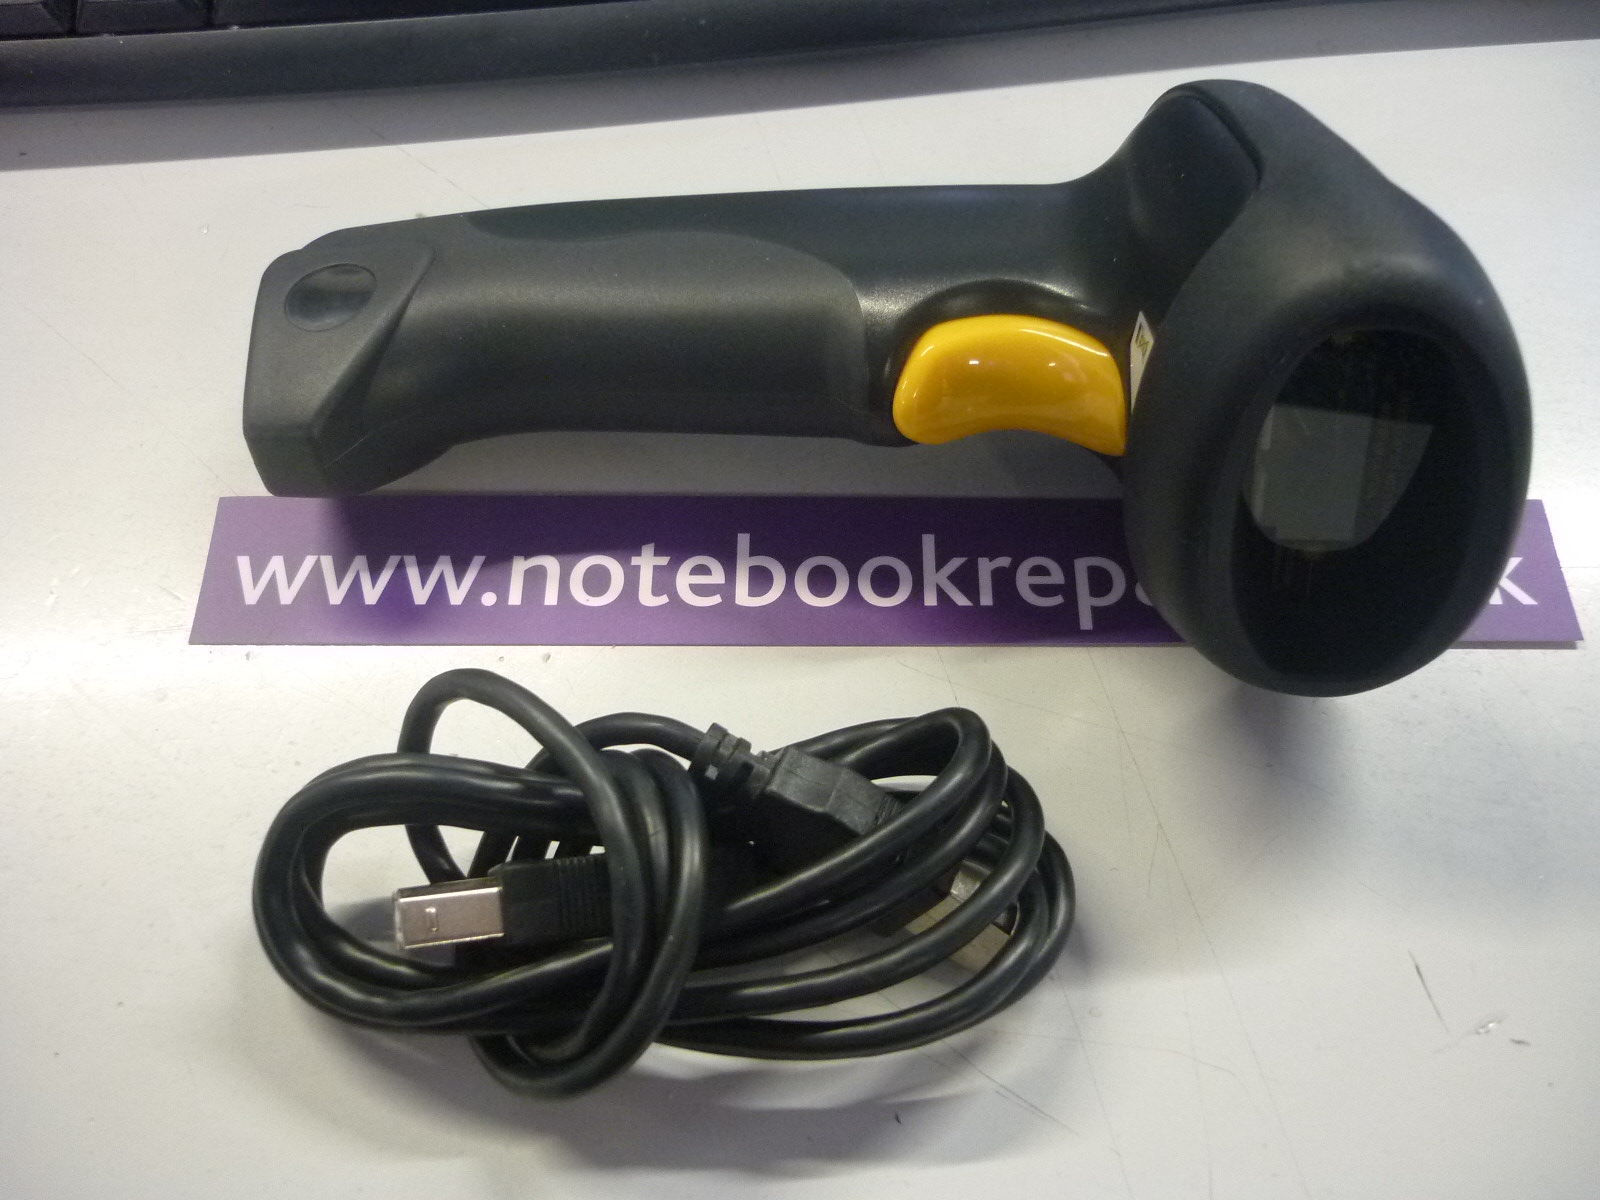 Inateck Wireless Barcode Scanner 1D,